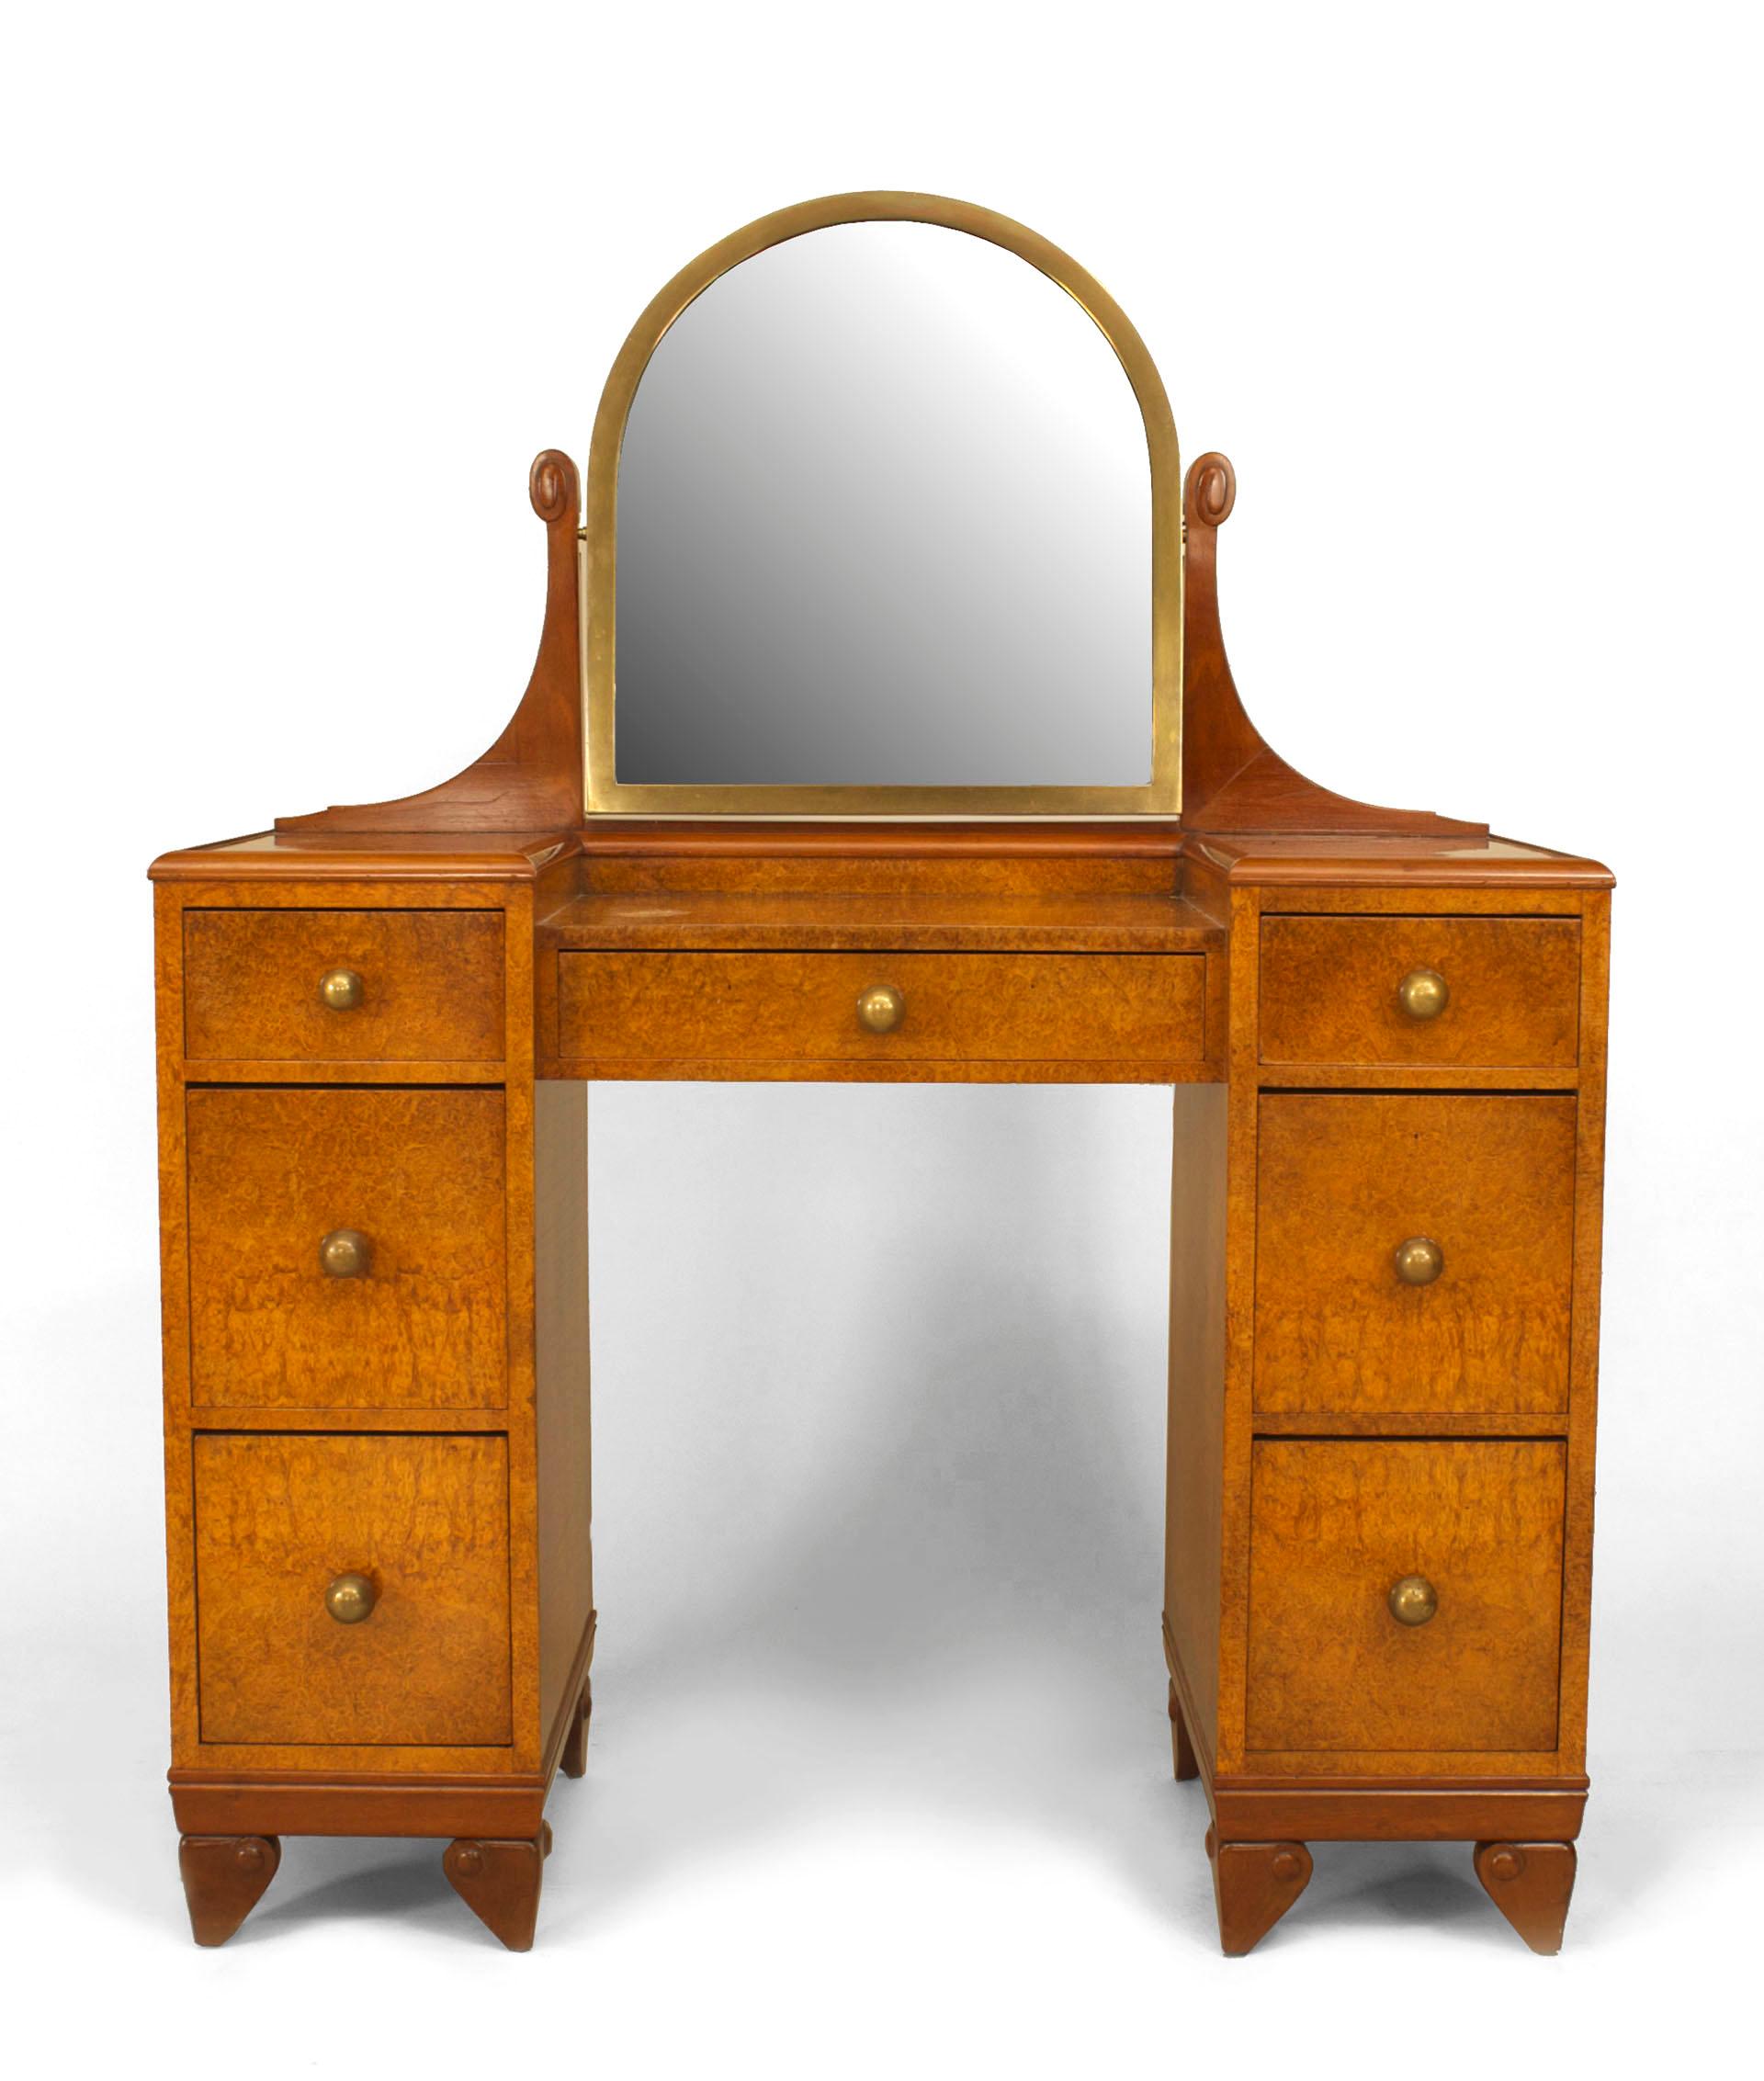 French Art Deco amboyna wood kneehole dressing table with a vanity mirror framed in bronze and seven drawers with brass ball-shaped pulls.